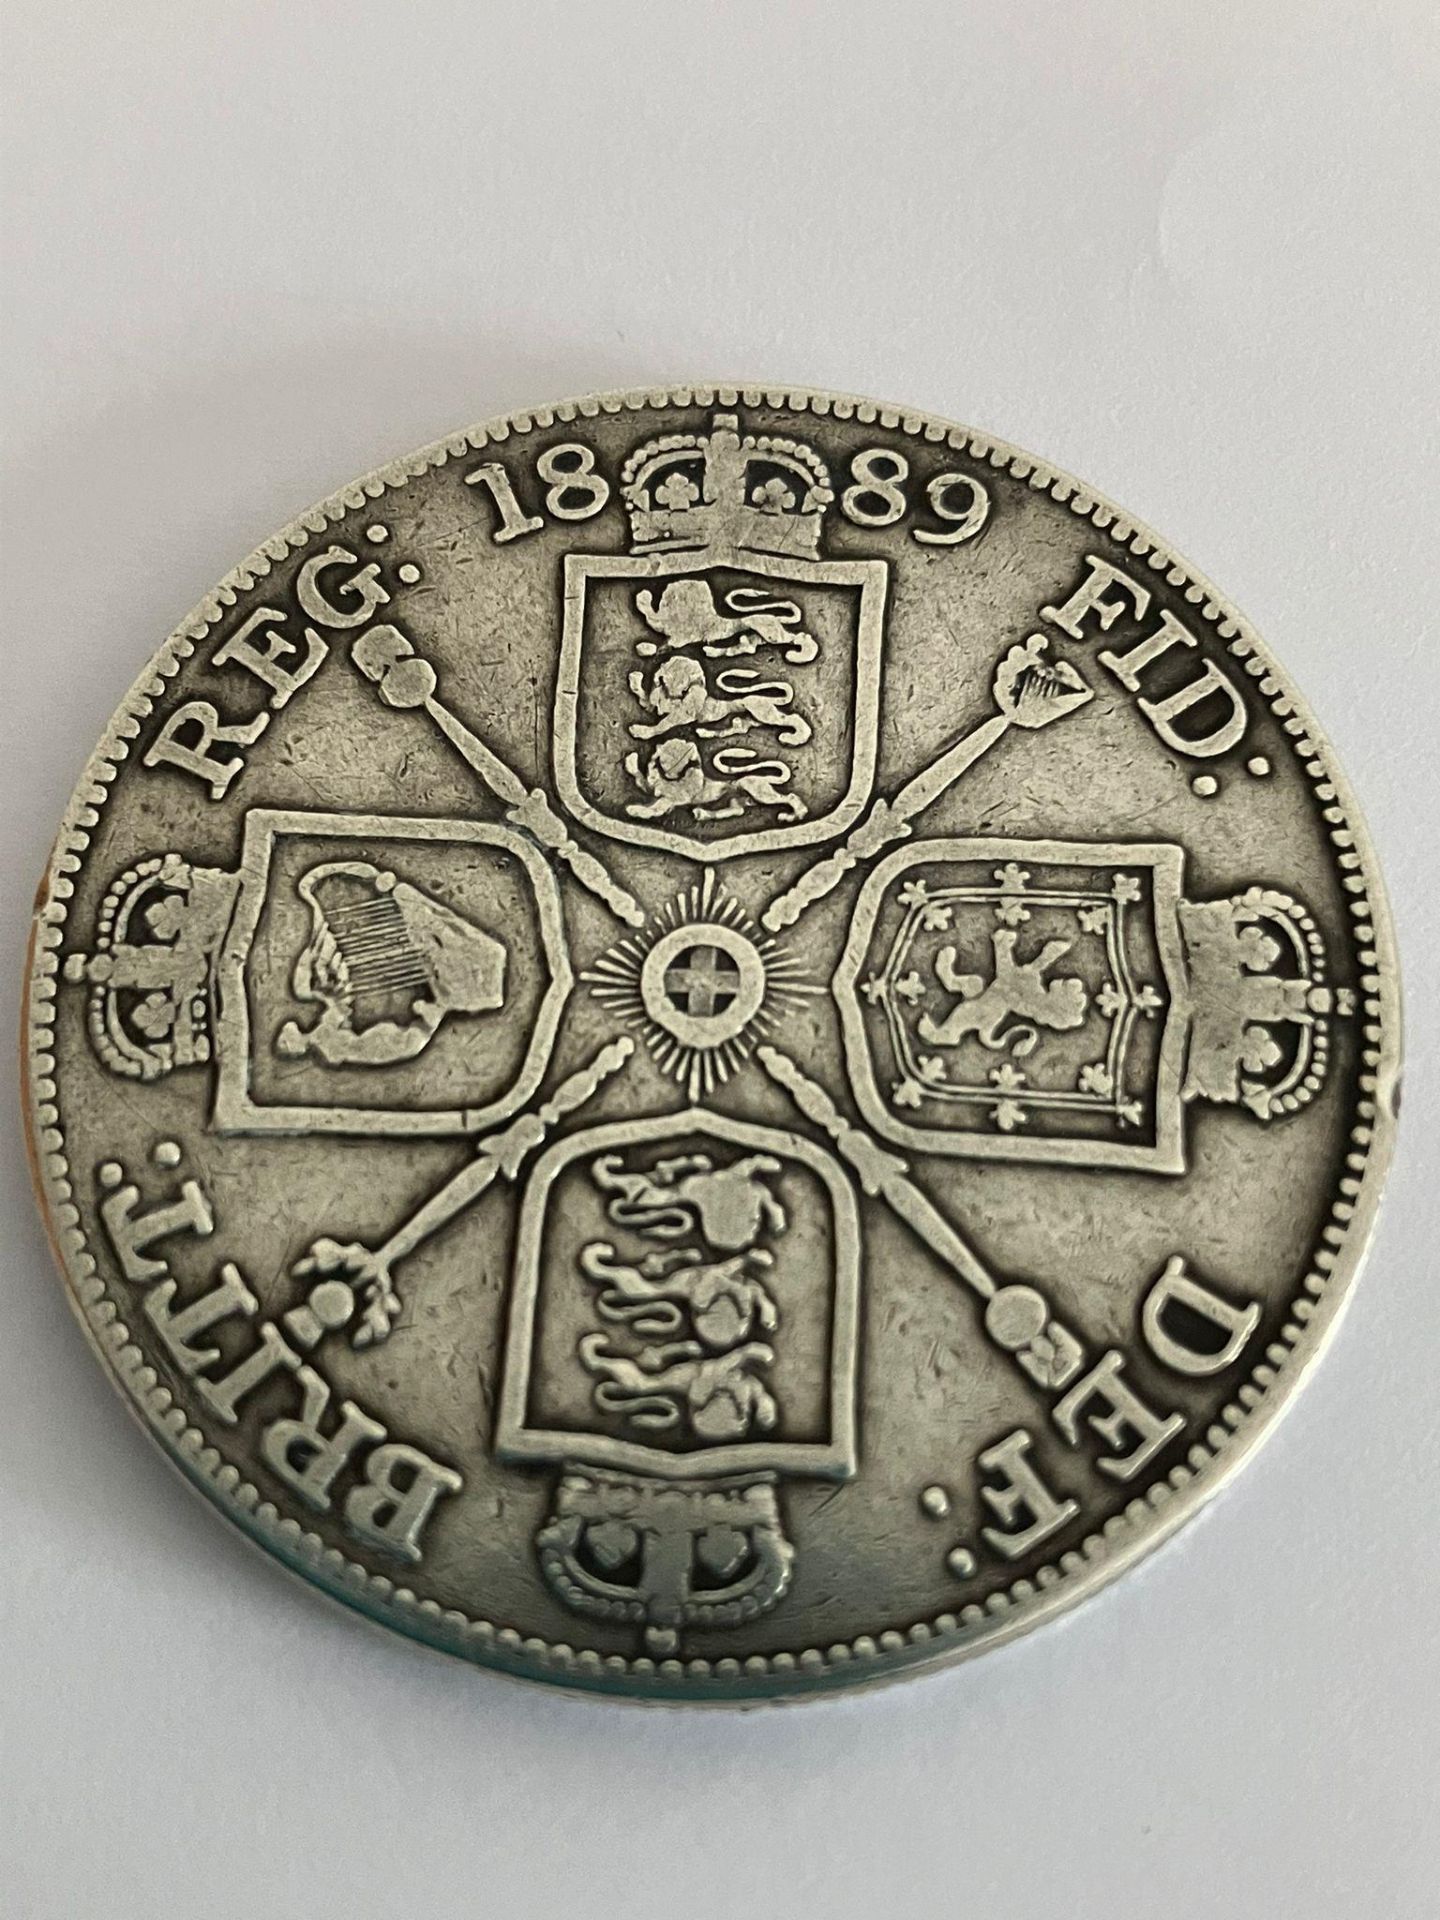 1889 SILVER DOUBLE FLORIN in very/extra fine condition. Having Bold and clear raised detail to